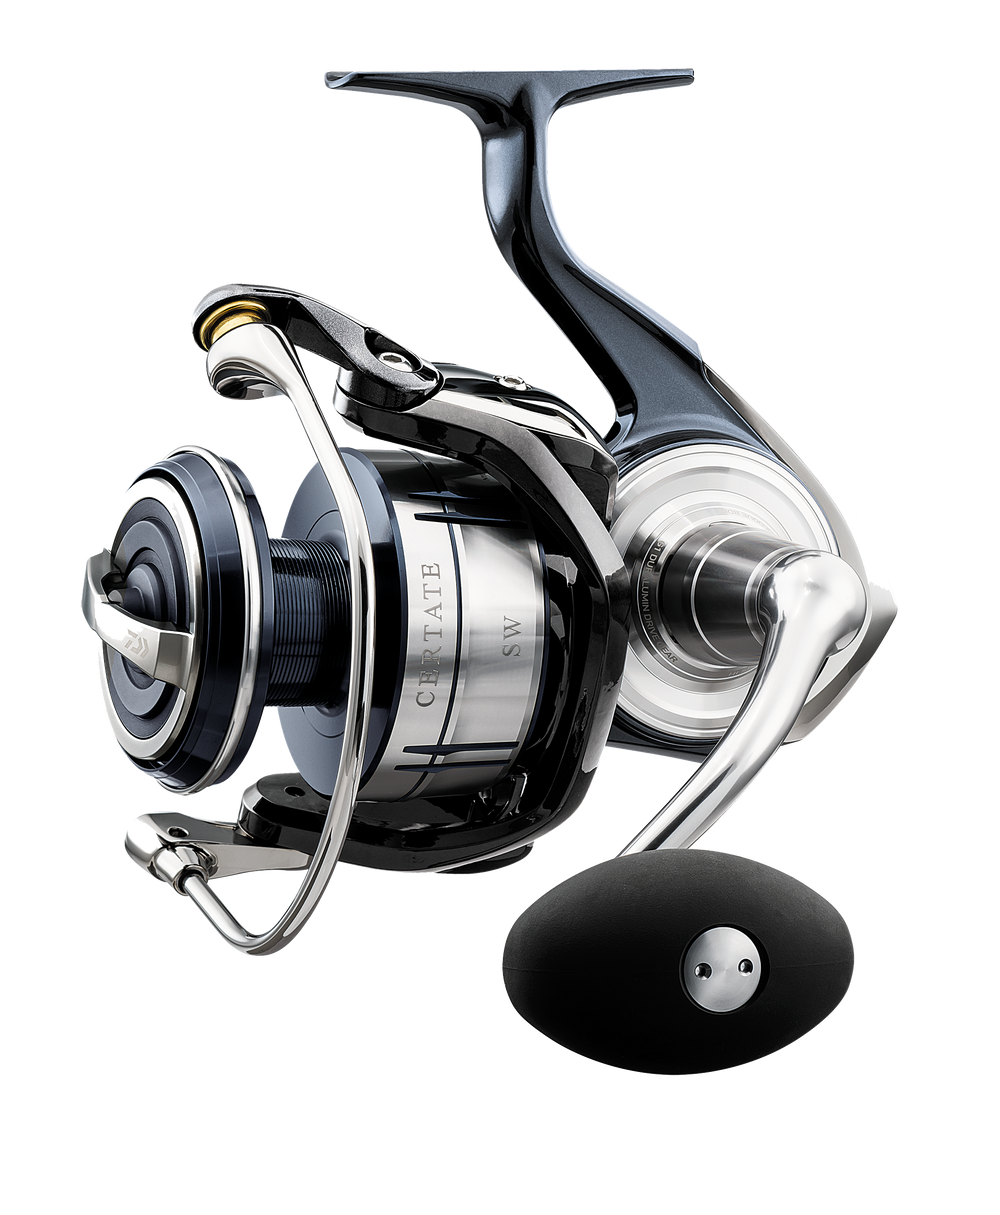 Daiwa 13 Certate 2510PE-H 6.0:1 Gear Spinning Reel Excellent+5 From Japan  Fedex